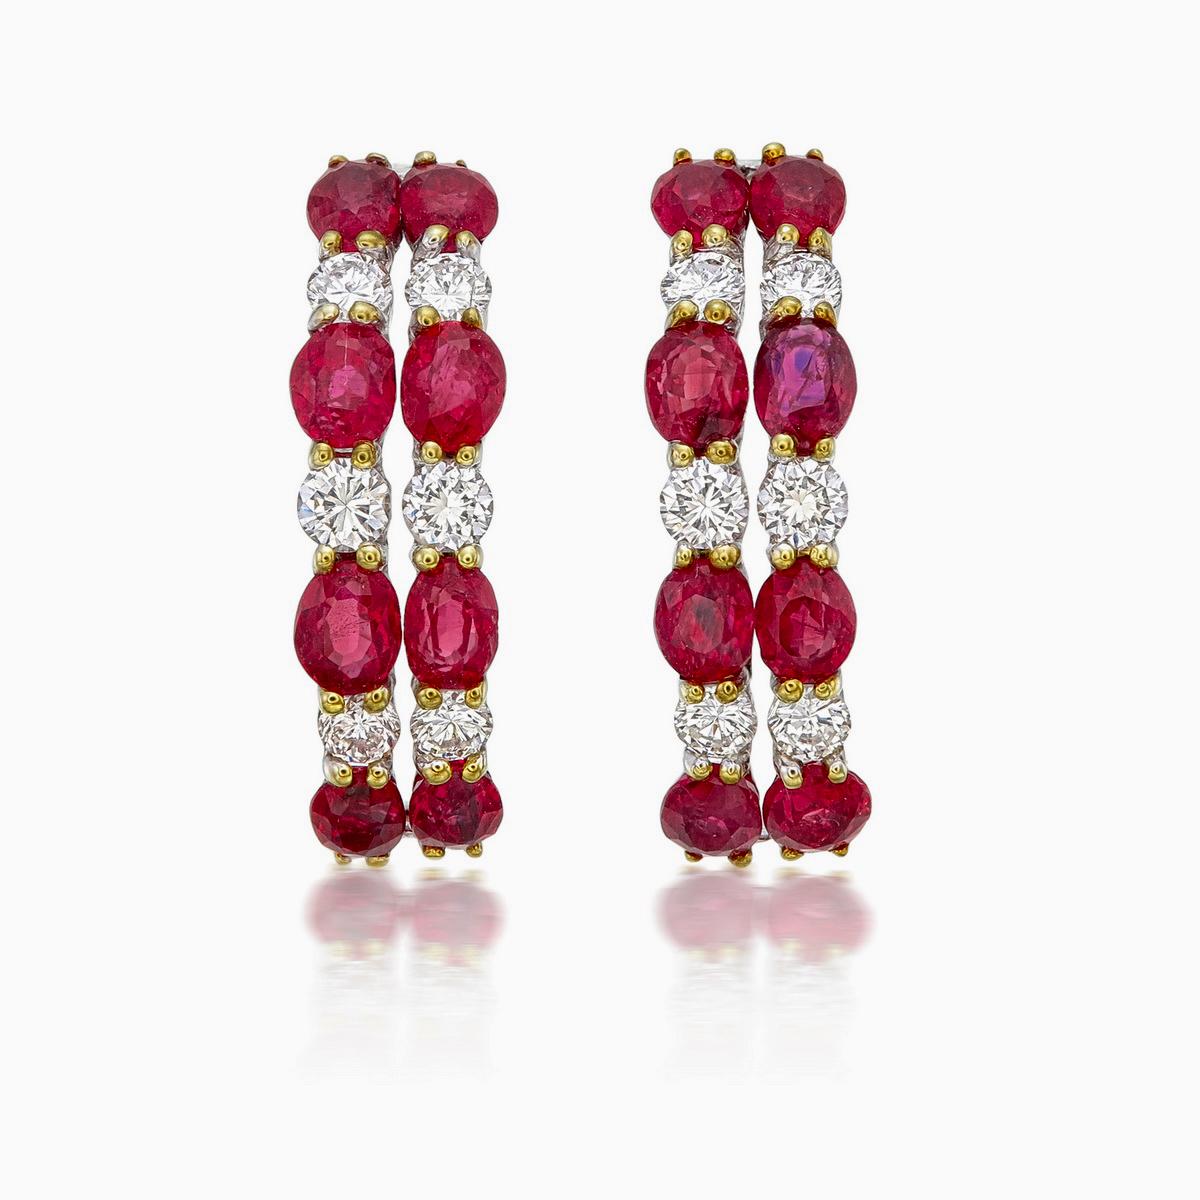 A pair of fine modern ruby and diamond earrings made in 18 Karat gold. This pair of earrings embraces minimalism with it's simple design while still displaying elegance; a great fit for lifestyle wear.

- There are sixteen oval rubies, eight of each